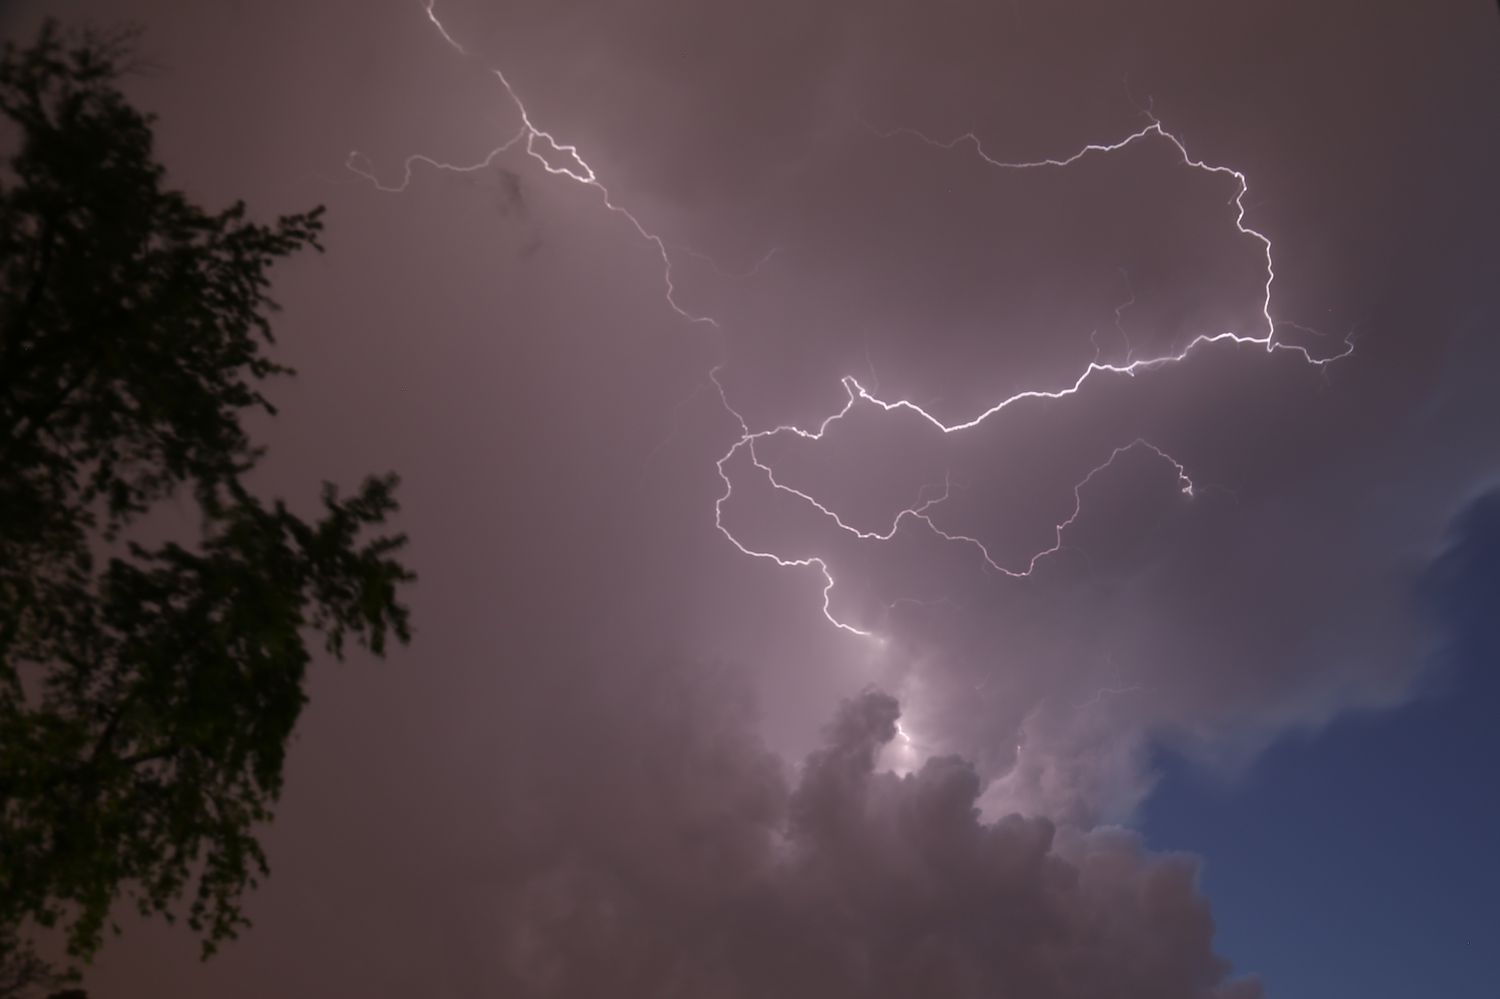 New Severe Weather Alerts in Romania: Heatwave Followed by Strong Storms